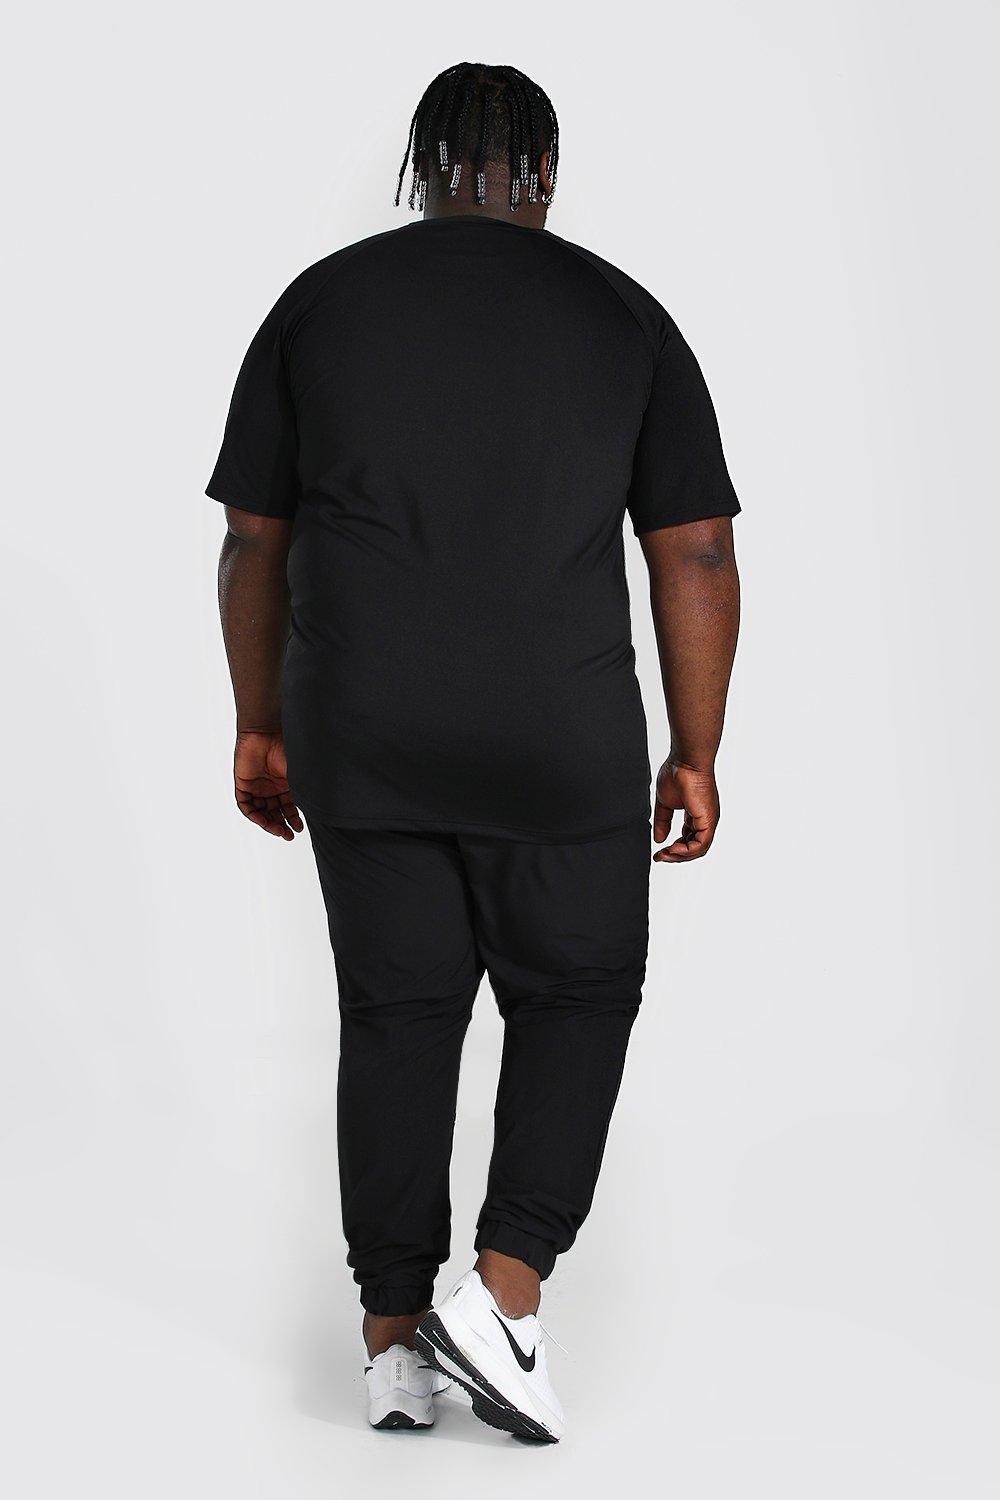 BoohooMAN Plus Size Man Active Tapered Jogger in Black for Men - Lyst